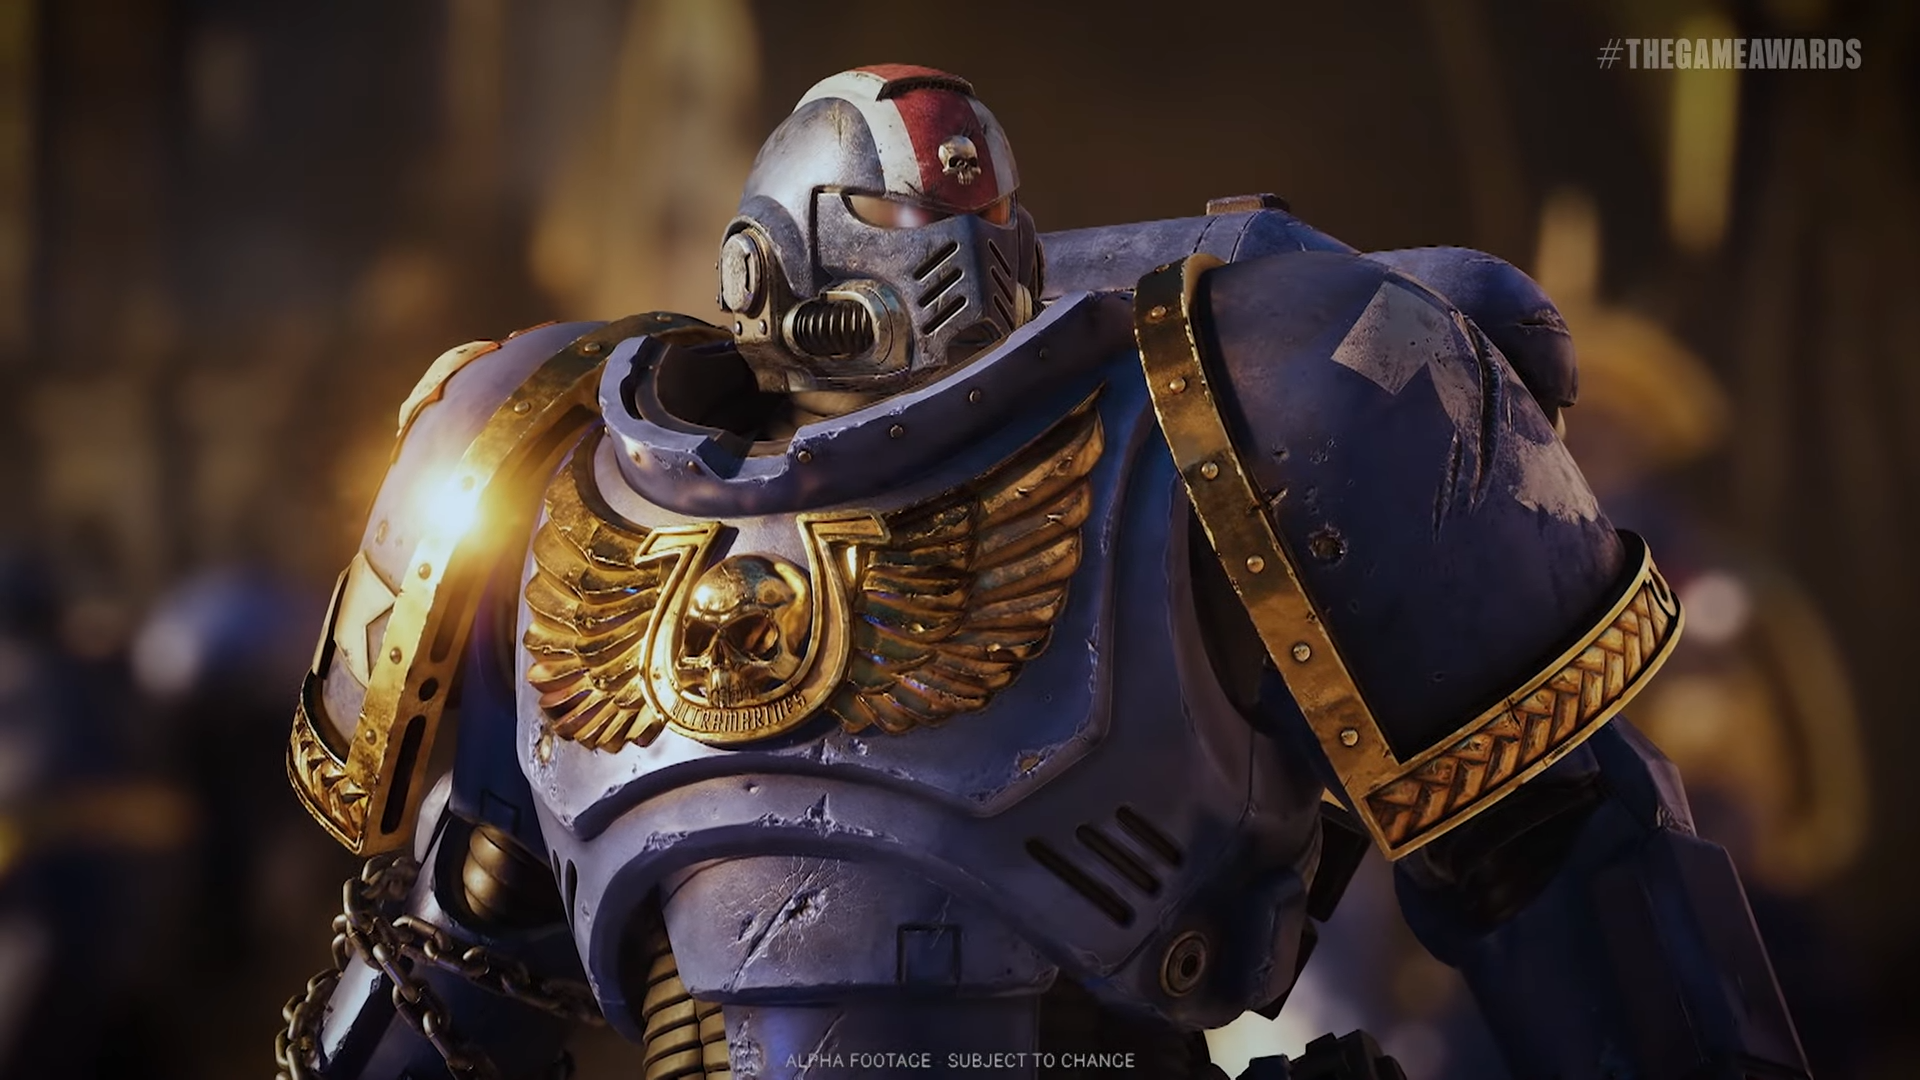 Space Marine 2 guy in a suit of armor.